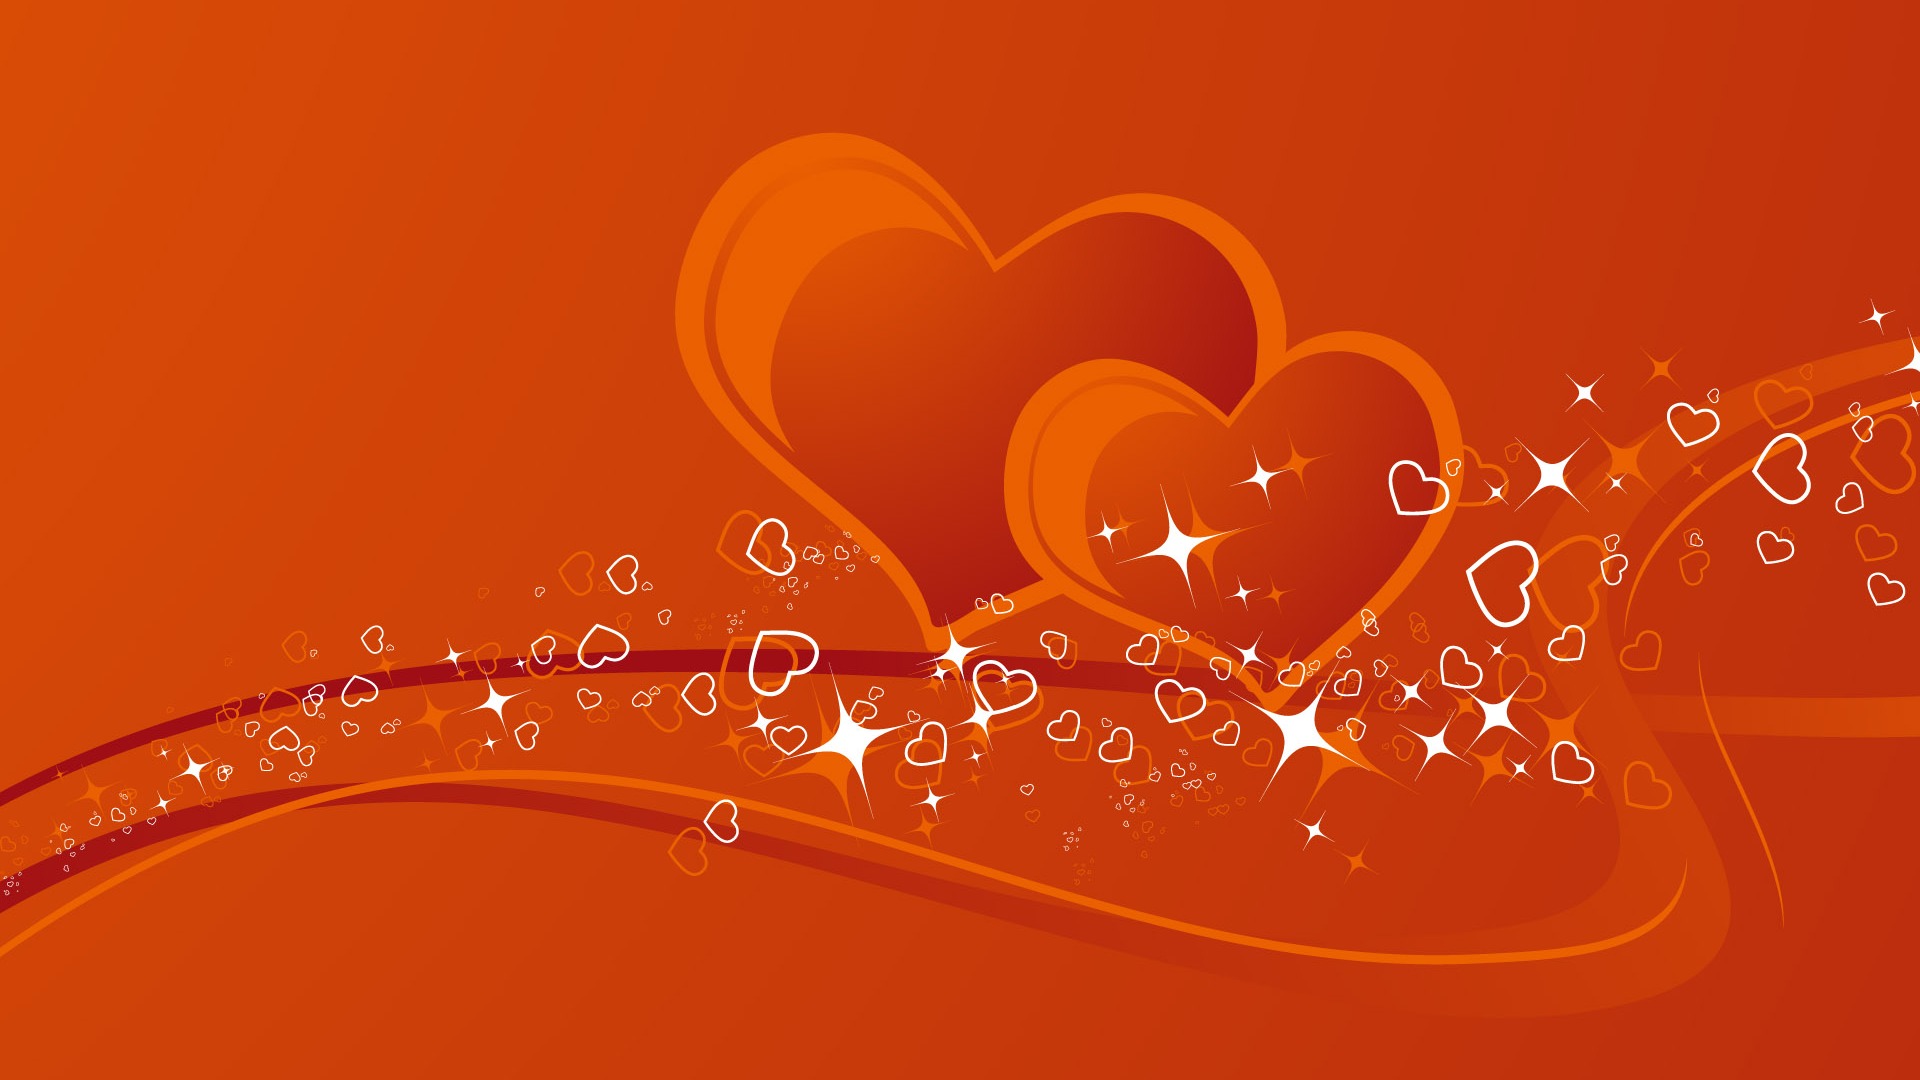 Valentine's Day Love Theme Wallpapers #25 - 1920x1080